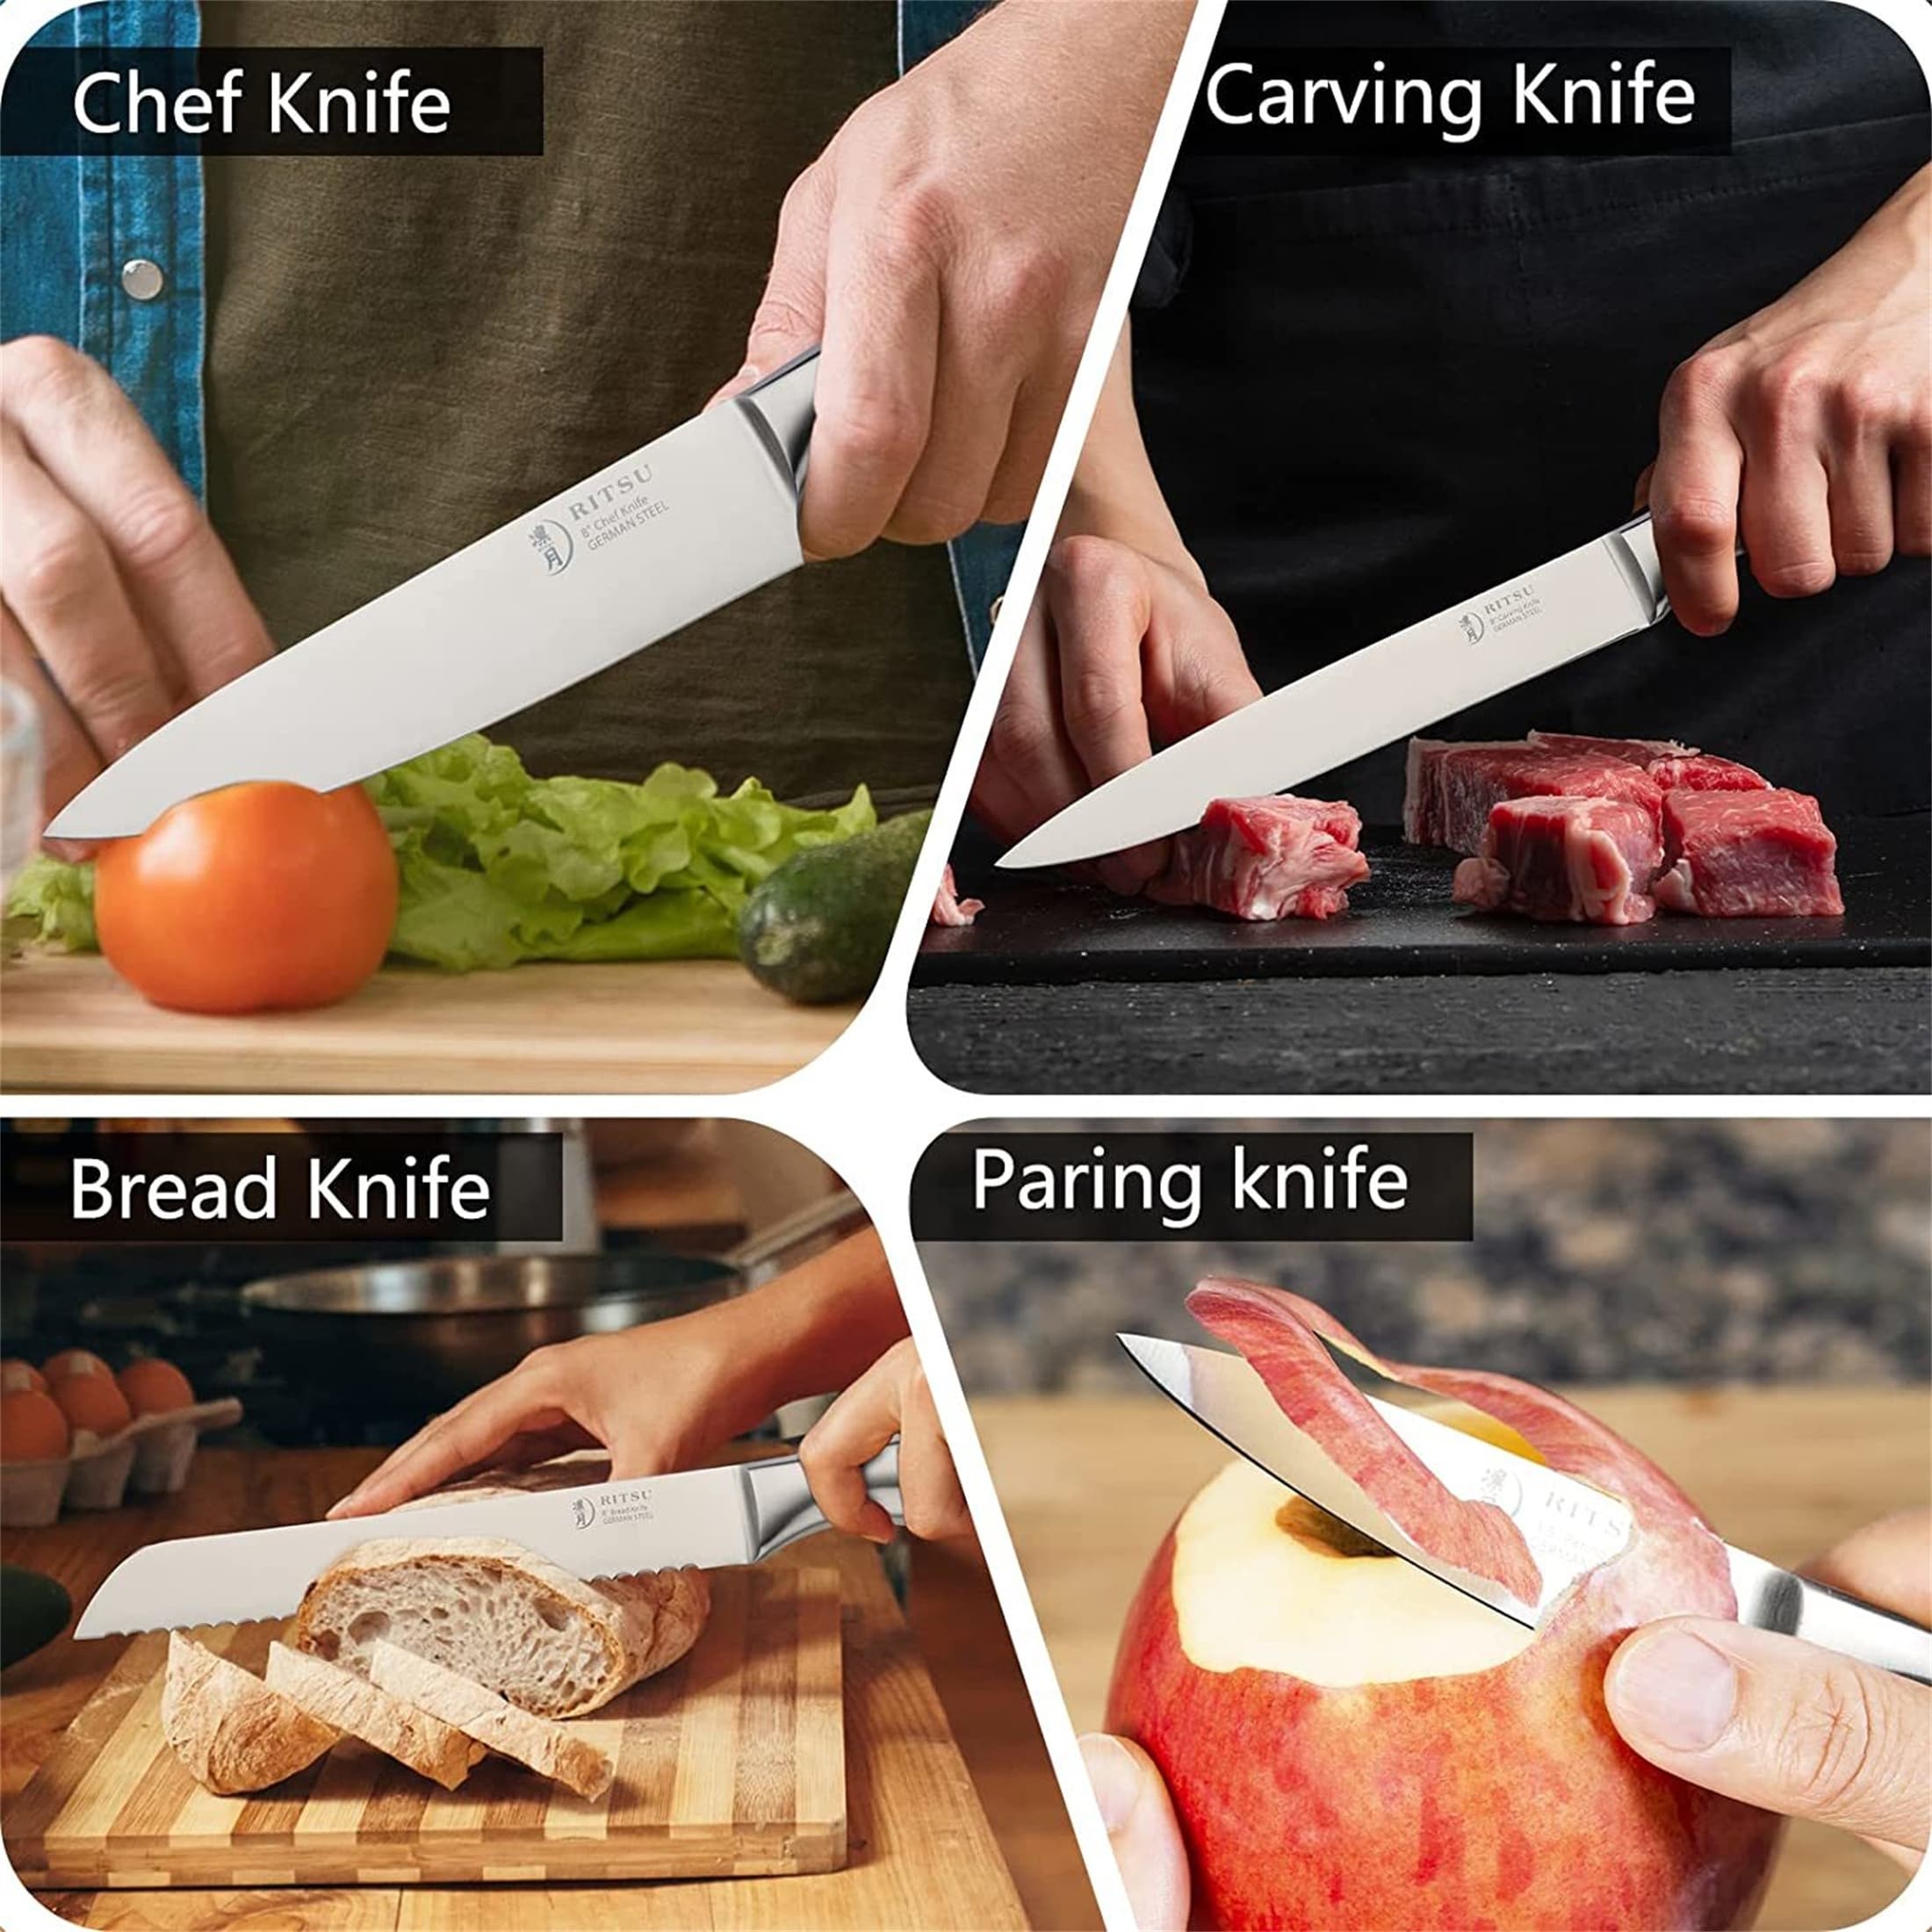 https://ak1.ostkcdn.com/images/products/is/images/direct/84dd5b4a84eacd8f3ddf6f74574102c465f3401a/12-Pieces-German-Steel-Knife-Set-With-Block-And-Steak-Knives.jpg